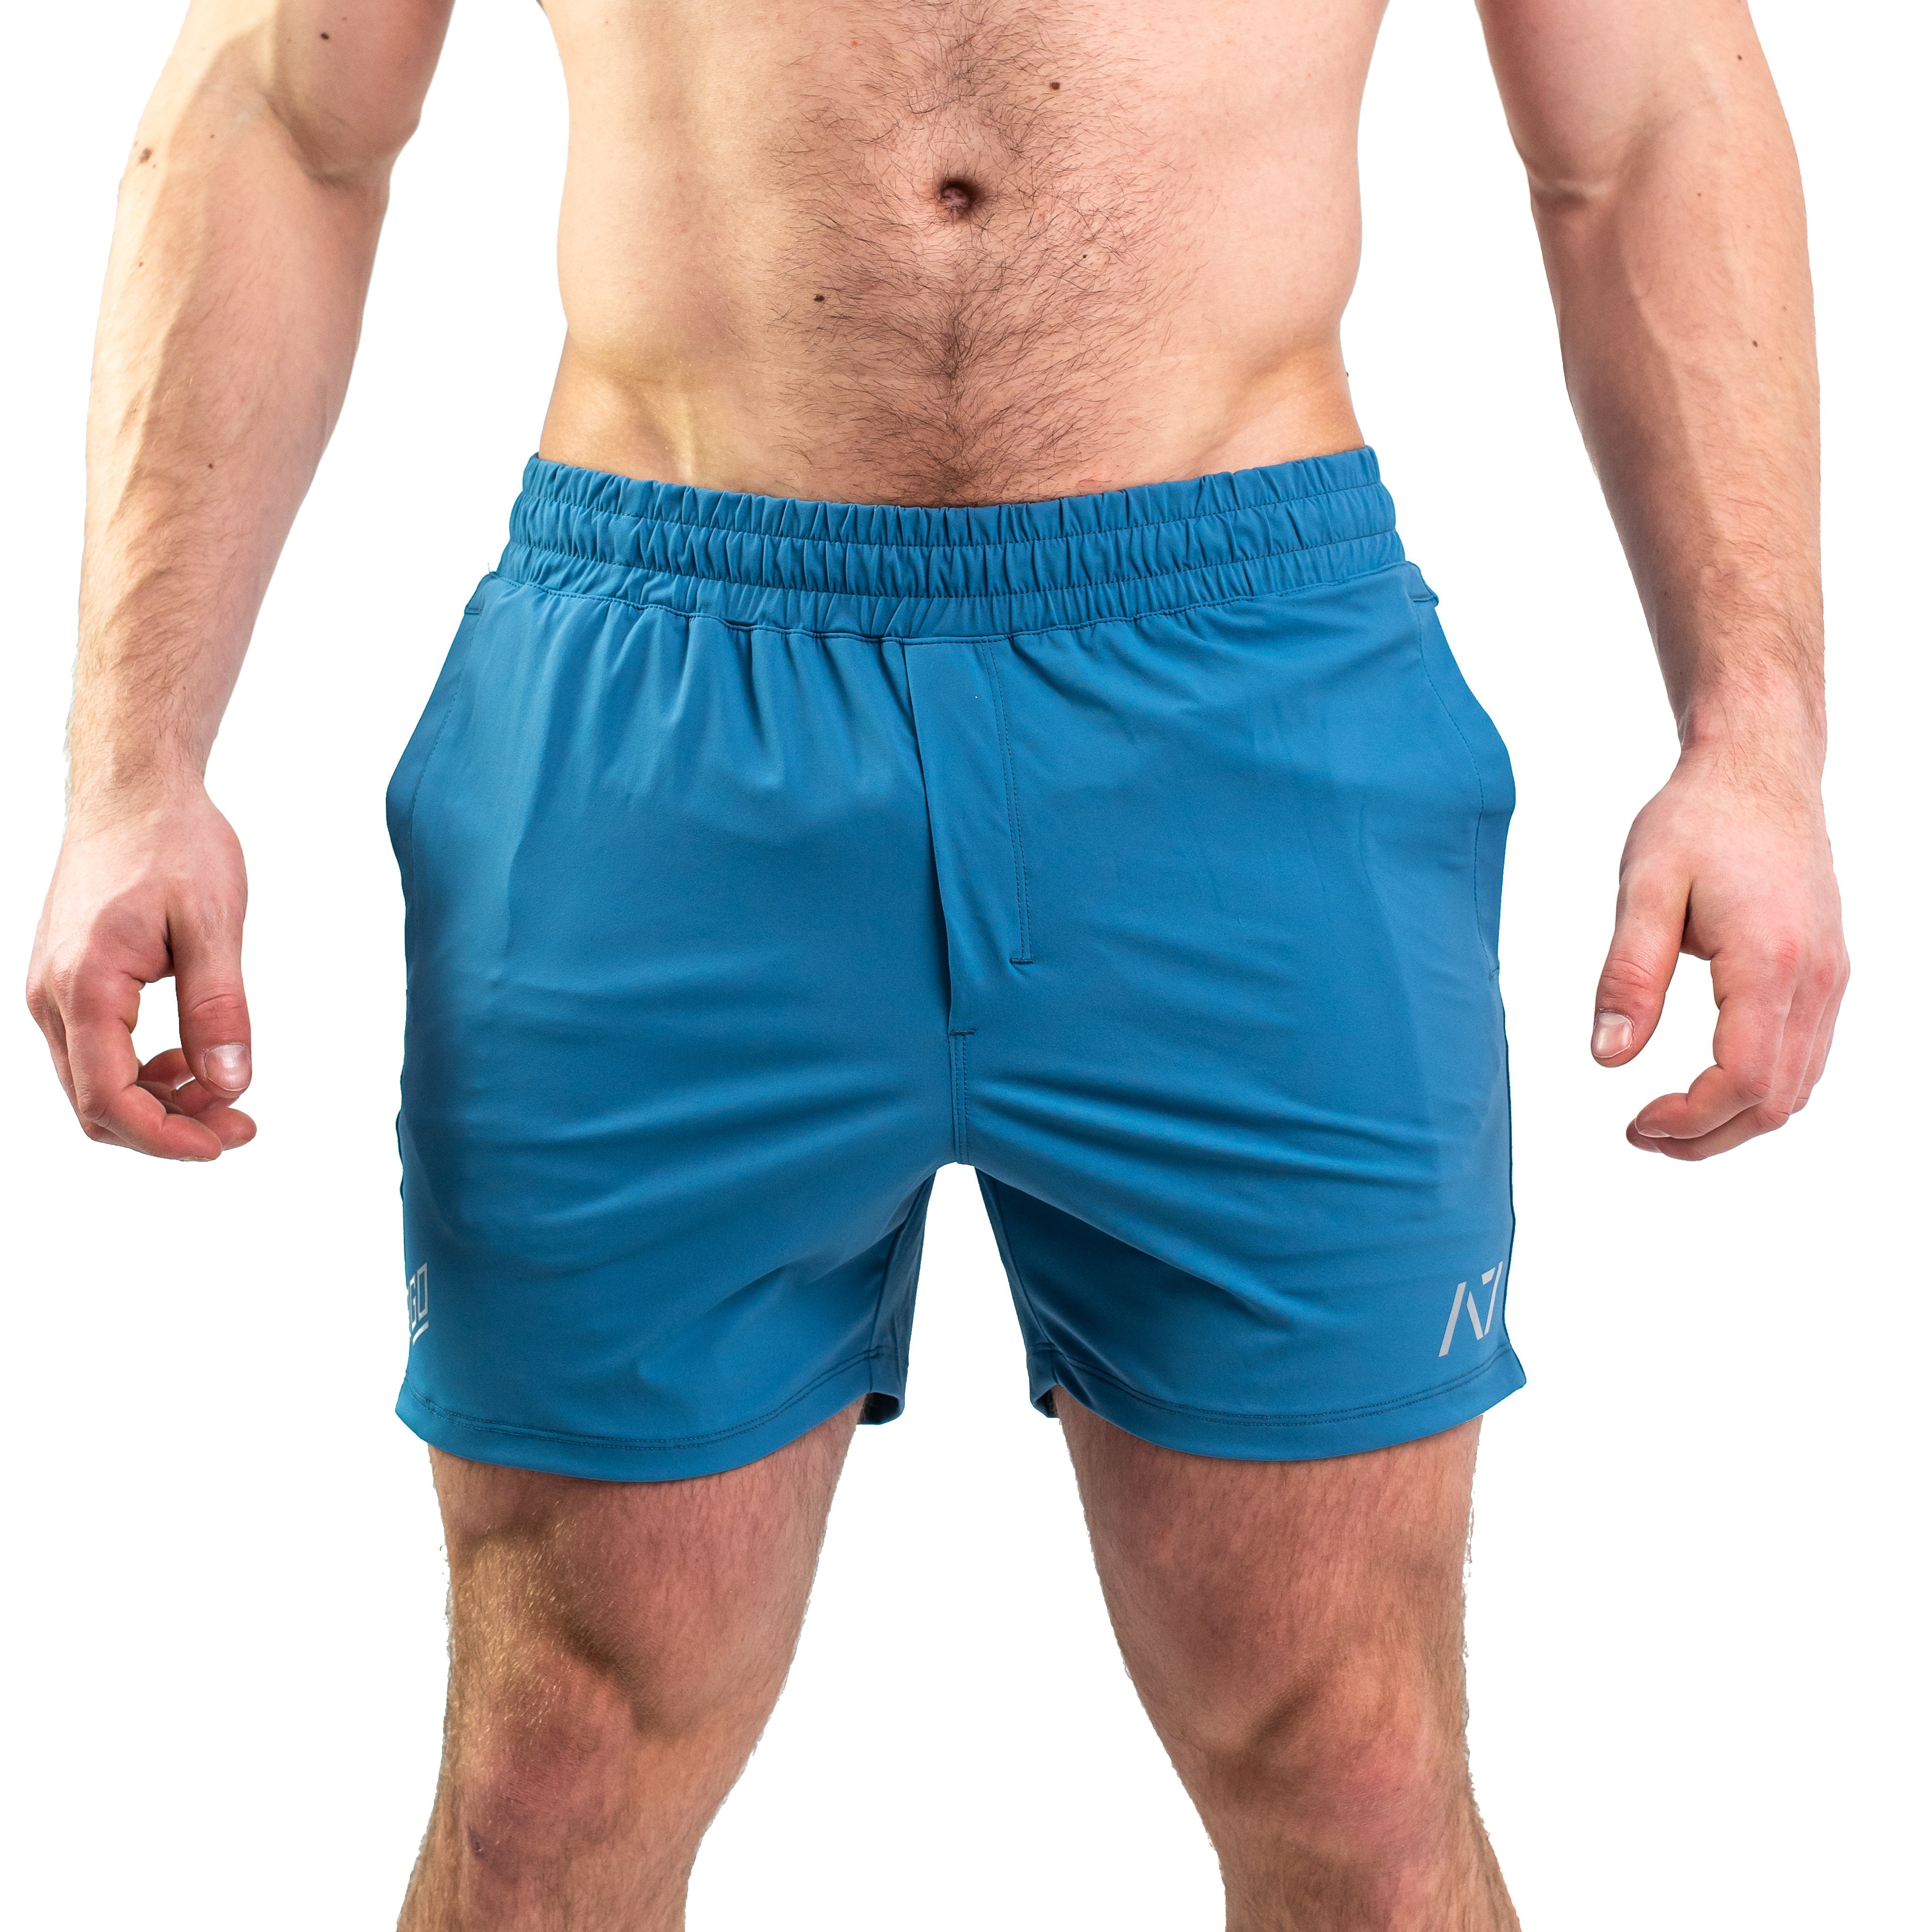 In life, the challenges we all face take Courage and Honour. This blue color was chosen for 360Go KWD Shorts to represent the honour, valour and compassion. These shorts offer 360 degrees of stretch in all angles and allow you to remain comfortable without limiting any movement in both training and life environments.